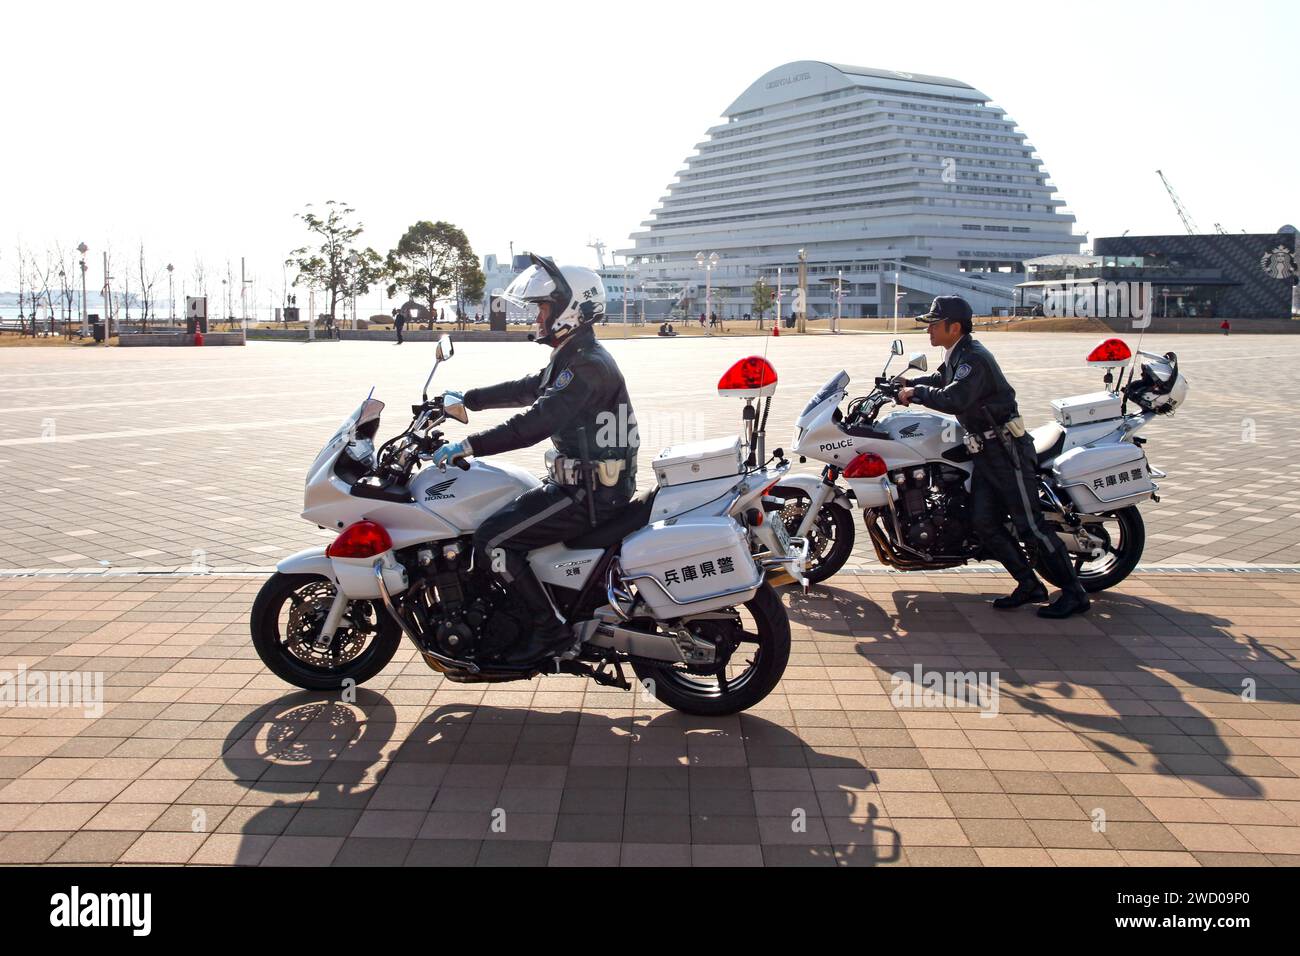 Two motorcycle police officers in Meriken Park, Kobe, Hoyogo Prefecture, Japan with Stock Photo